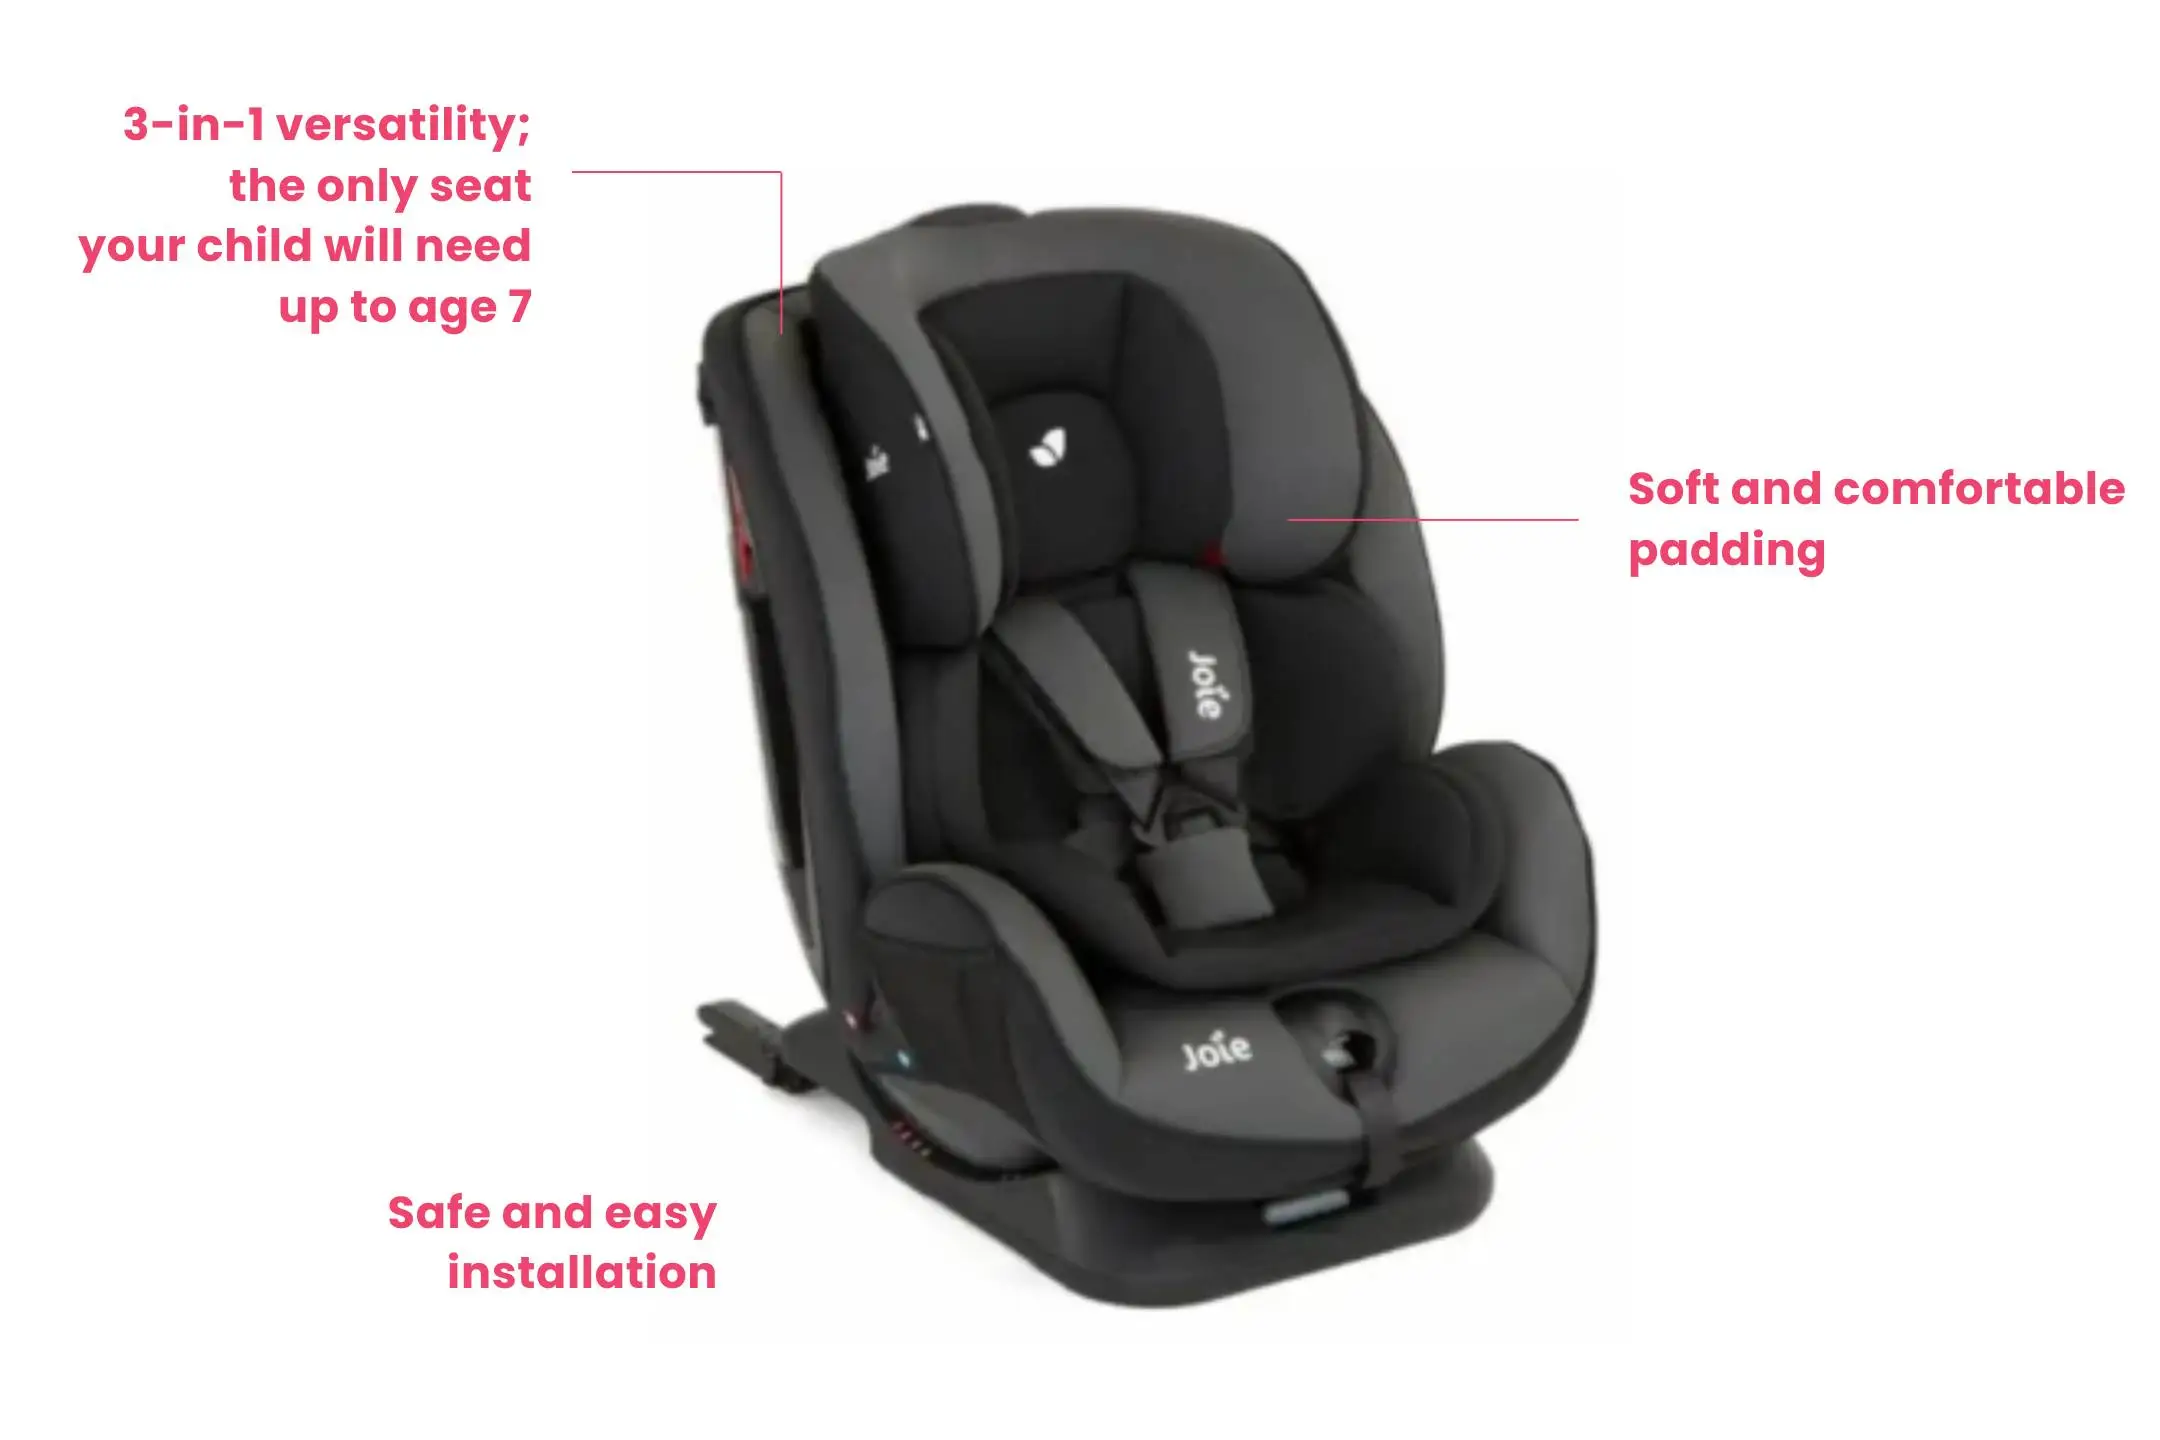 Joie Stages Fx Car Seat features